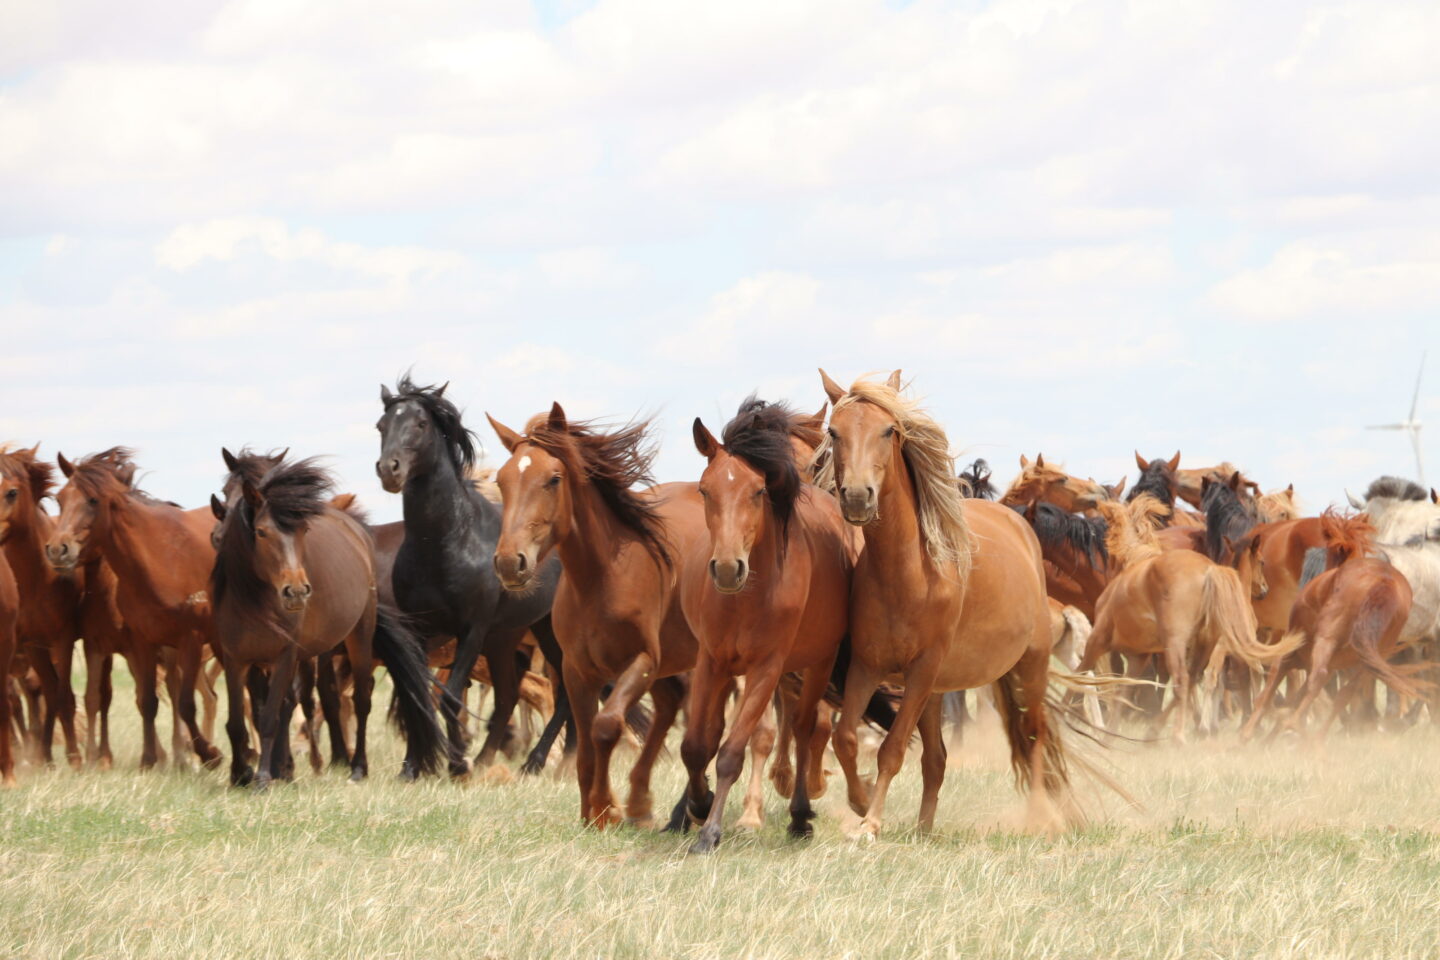 Herd of horses on the steppe